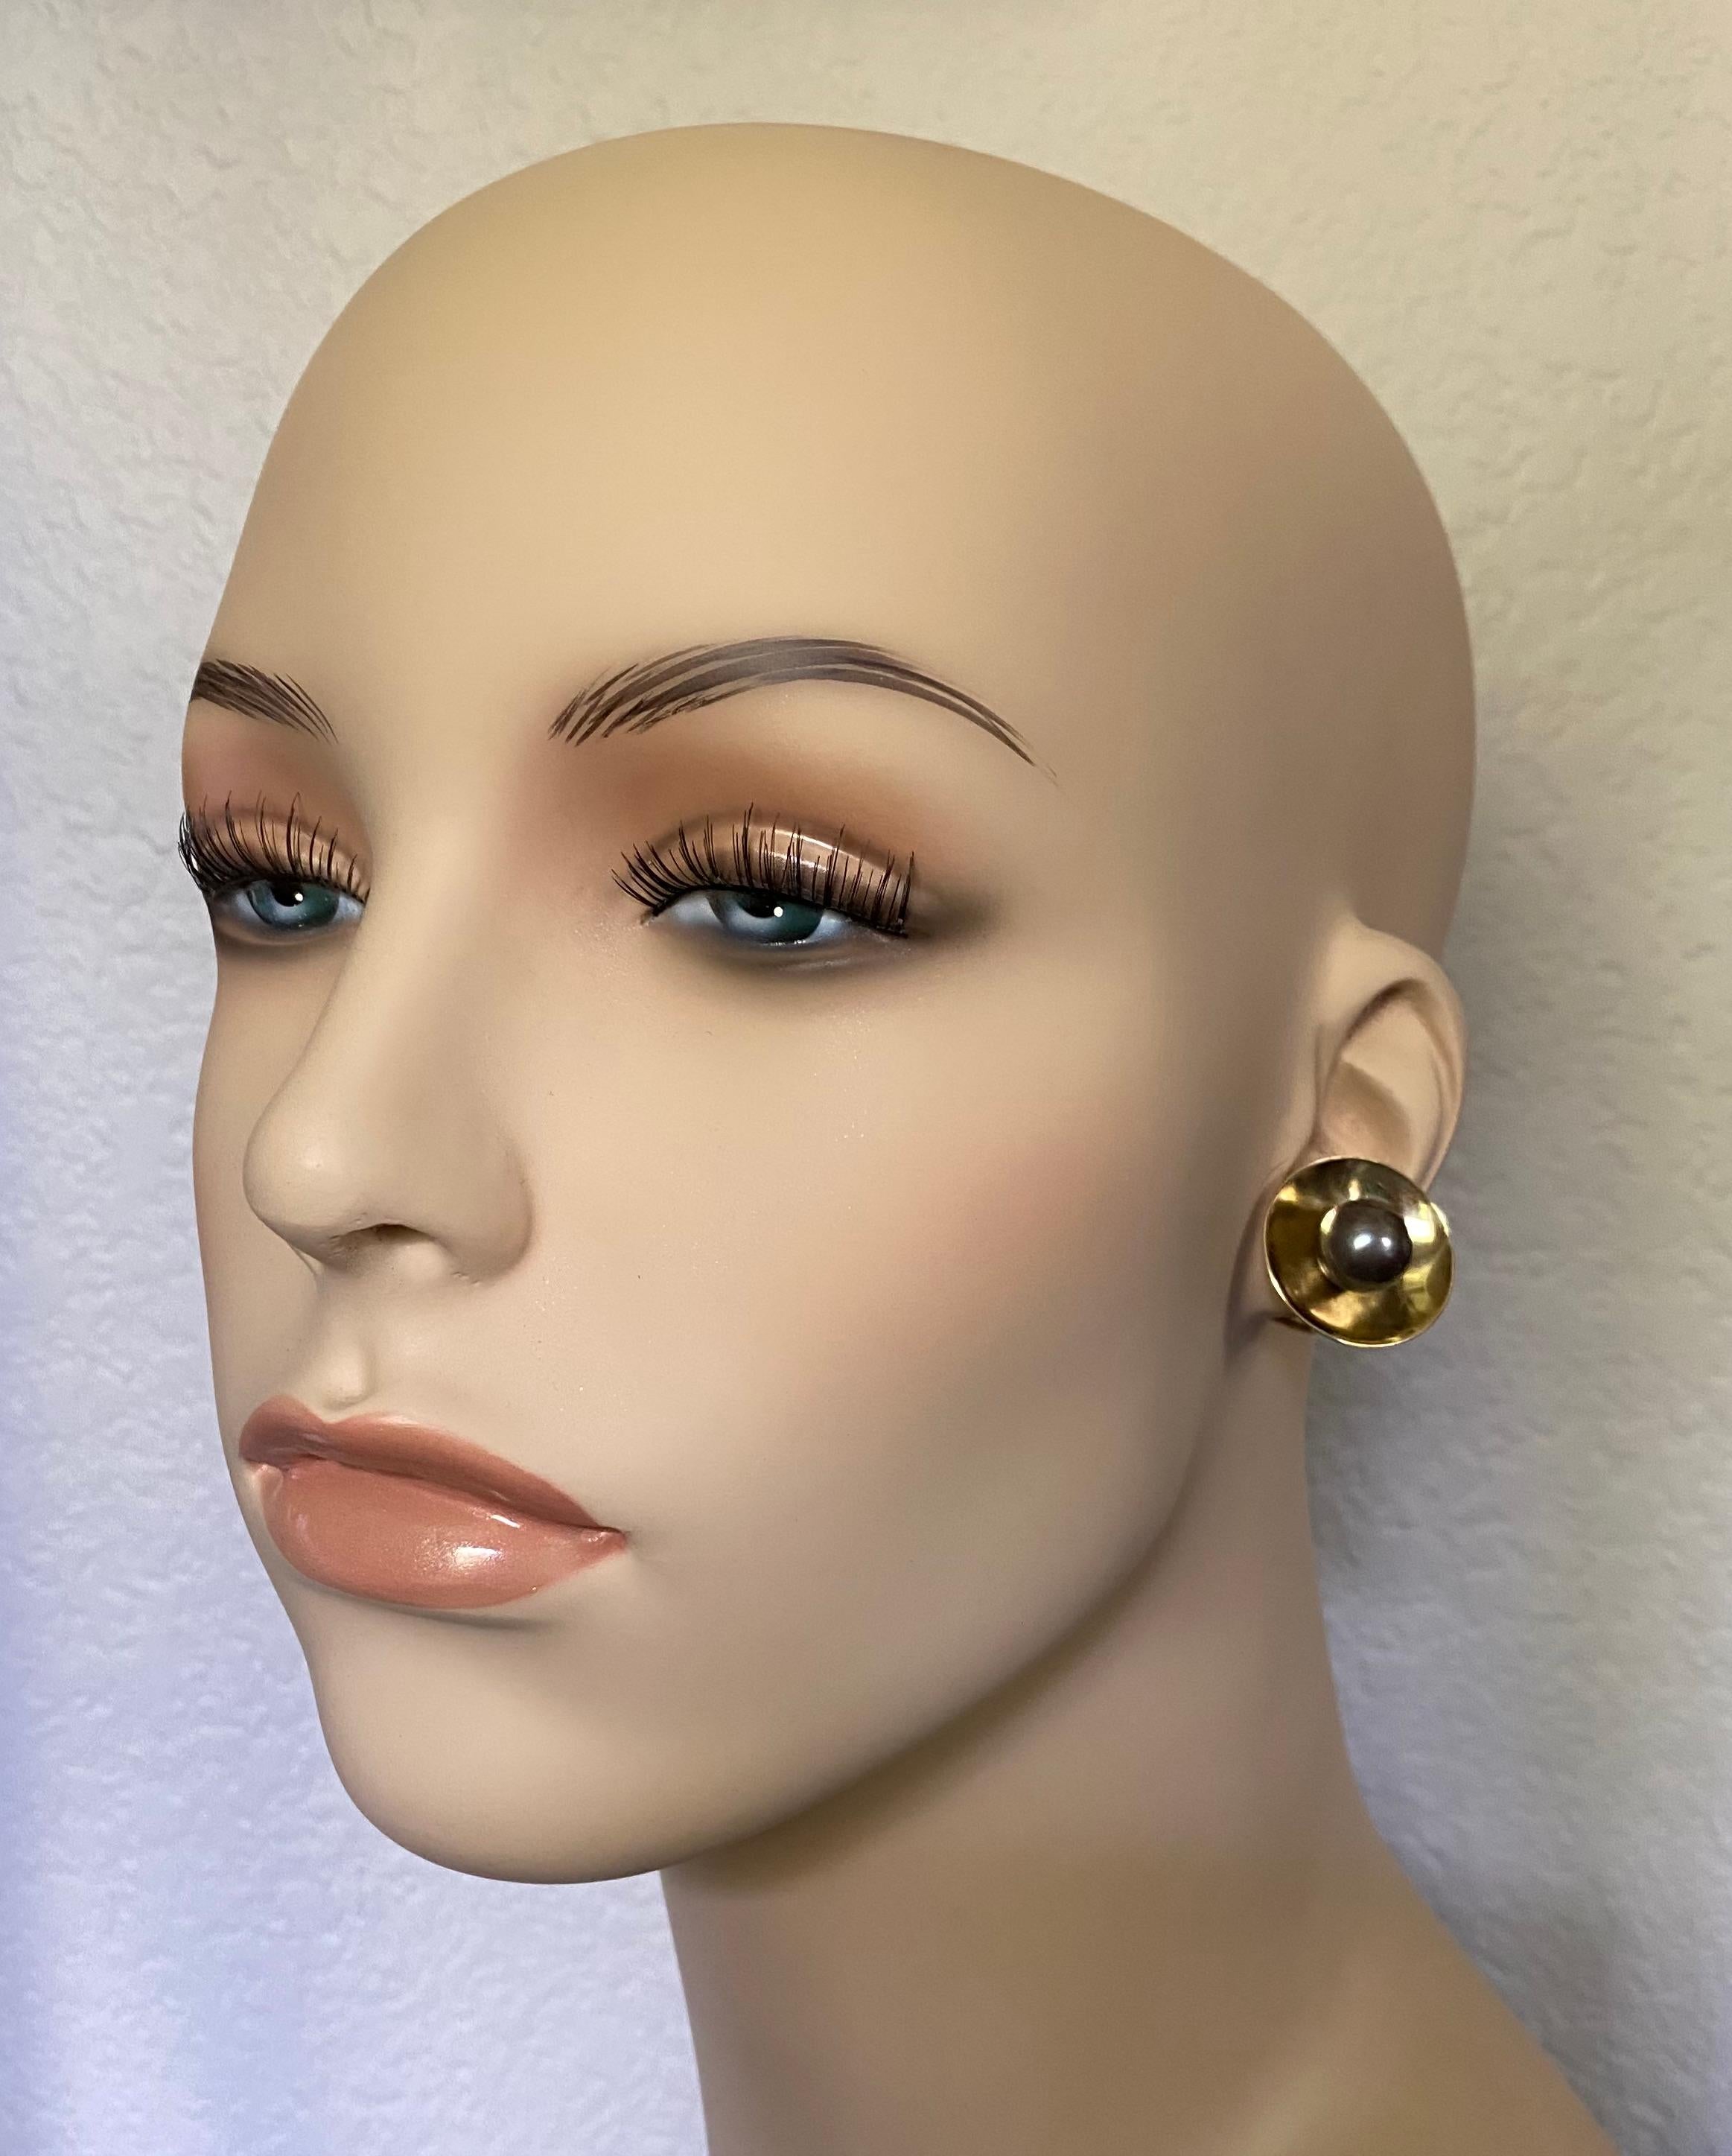 11mm medium gray Tahitian pearls are showcased in these classic 18k yellow gold button earrings.  The gem quality pearls are blemish free and possess a rich luster.  The pearls are set within concave disks that reflect the pearl color and thus